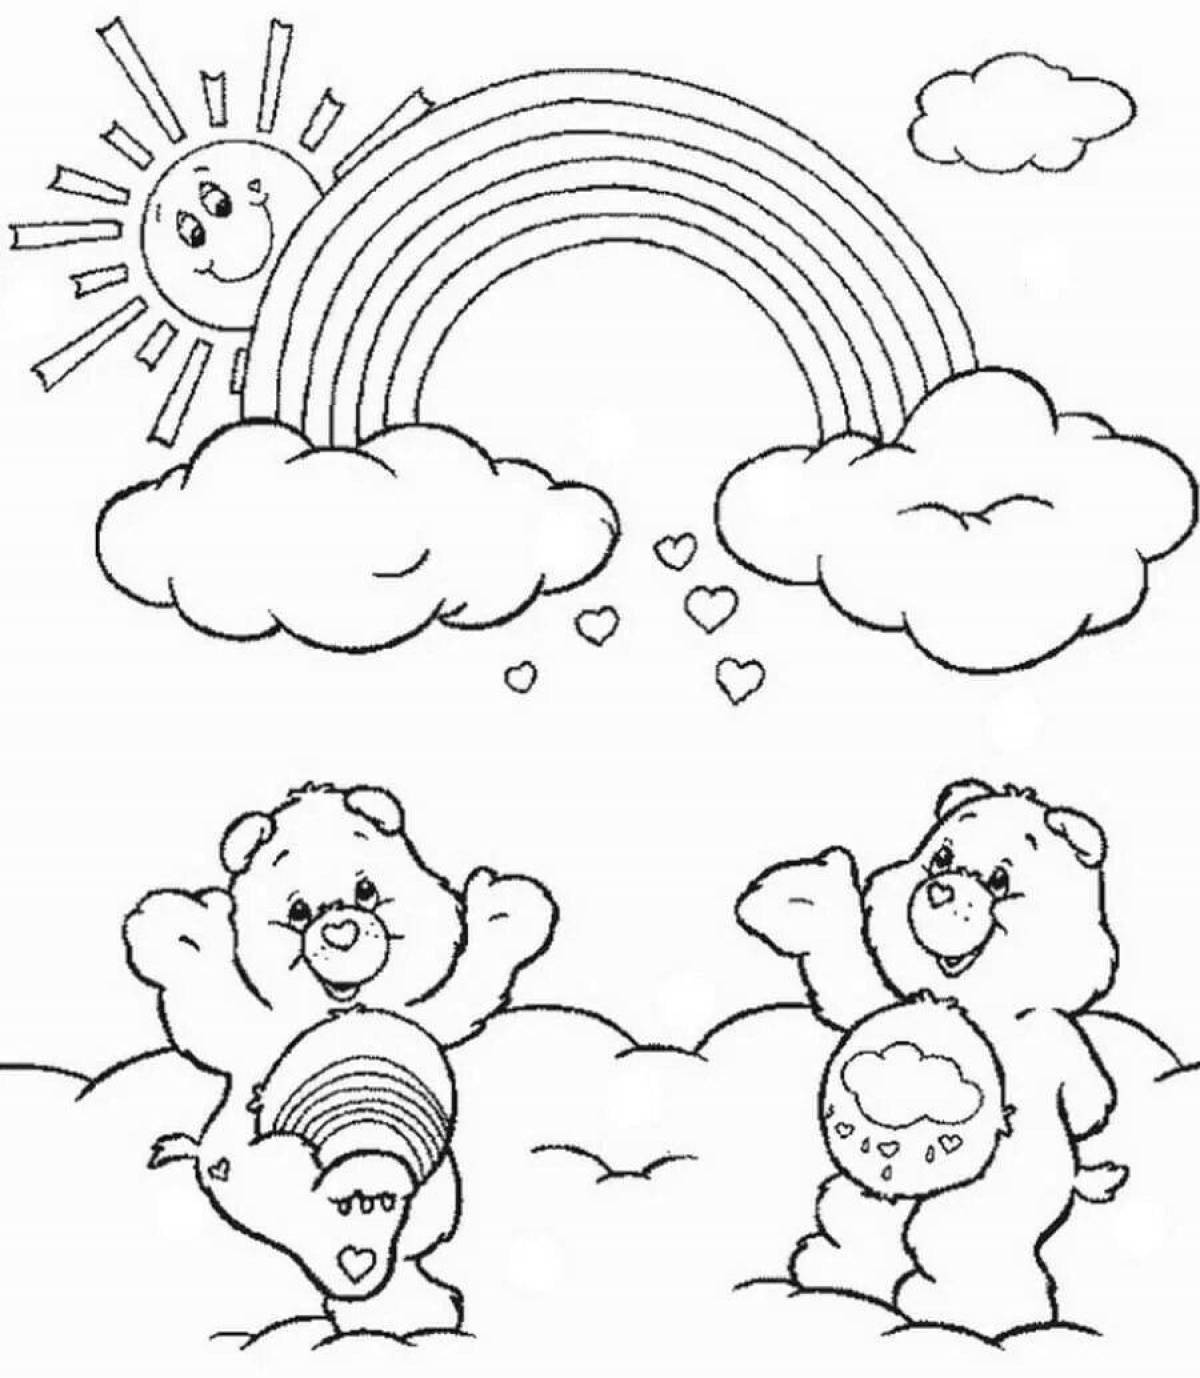 Color-party rainbow friends coloring page